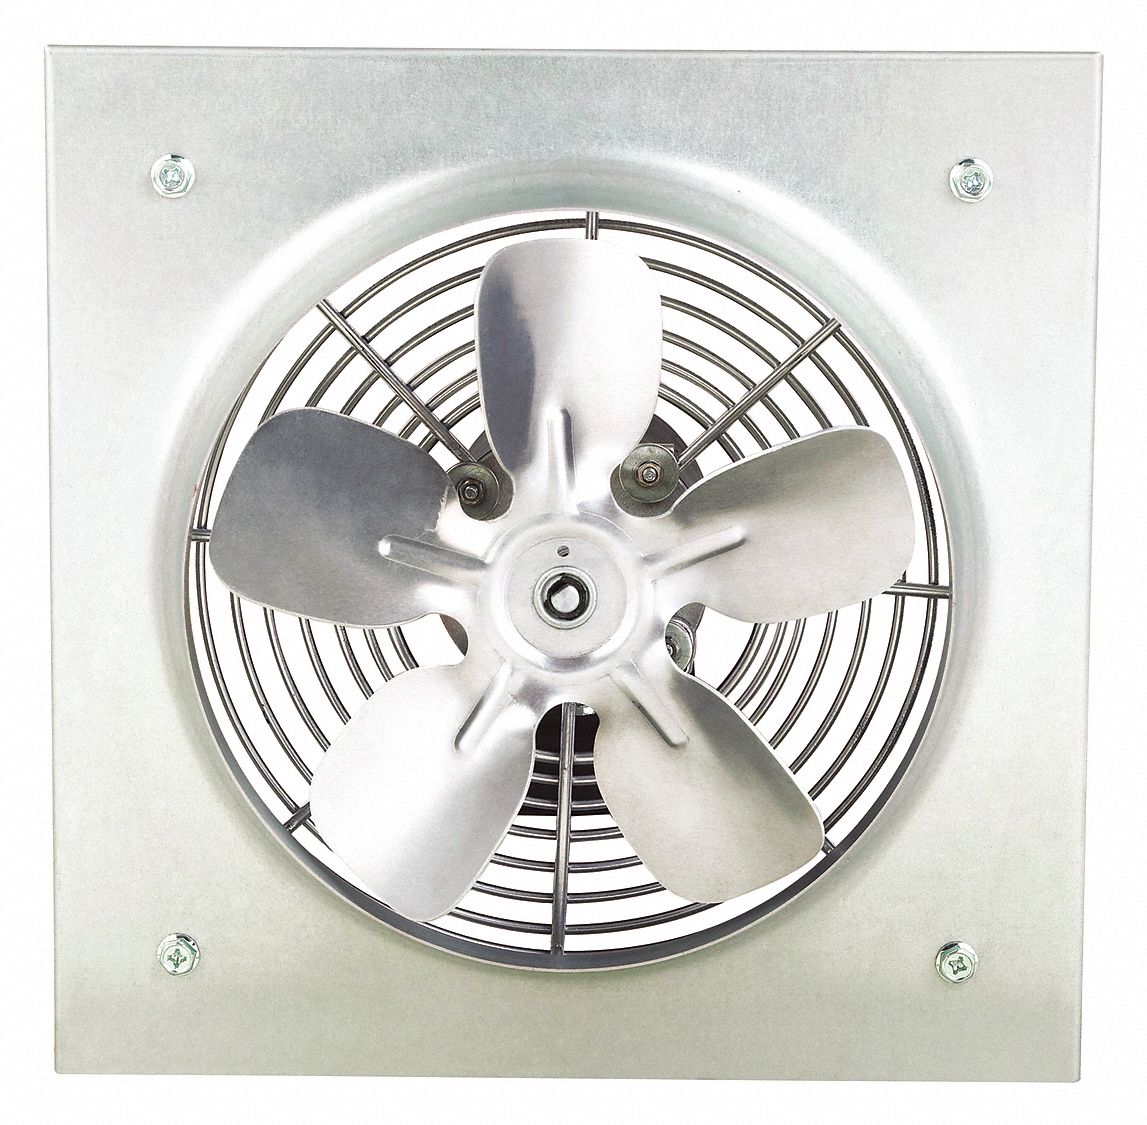 14 in" x 14 in" 115V ACV Medium Duty Direct Drive Exhaust Fan with 10 in Blade Dia.